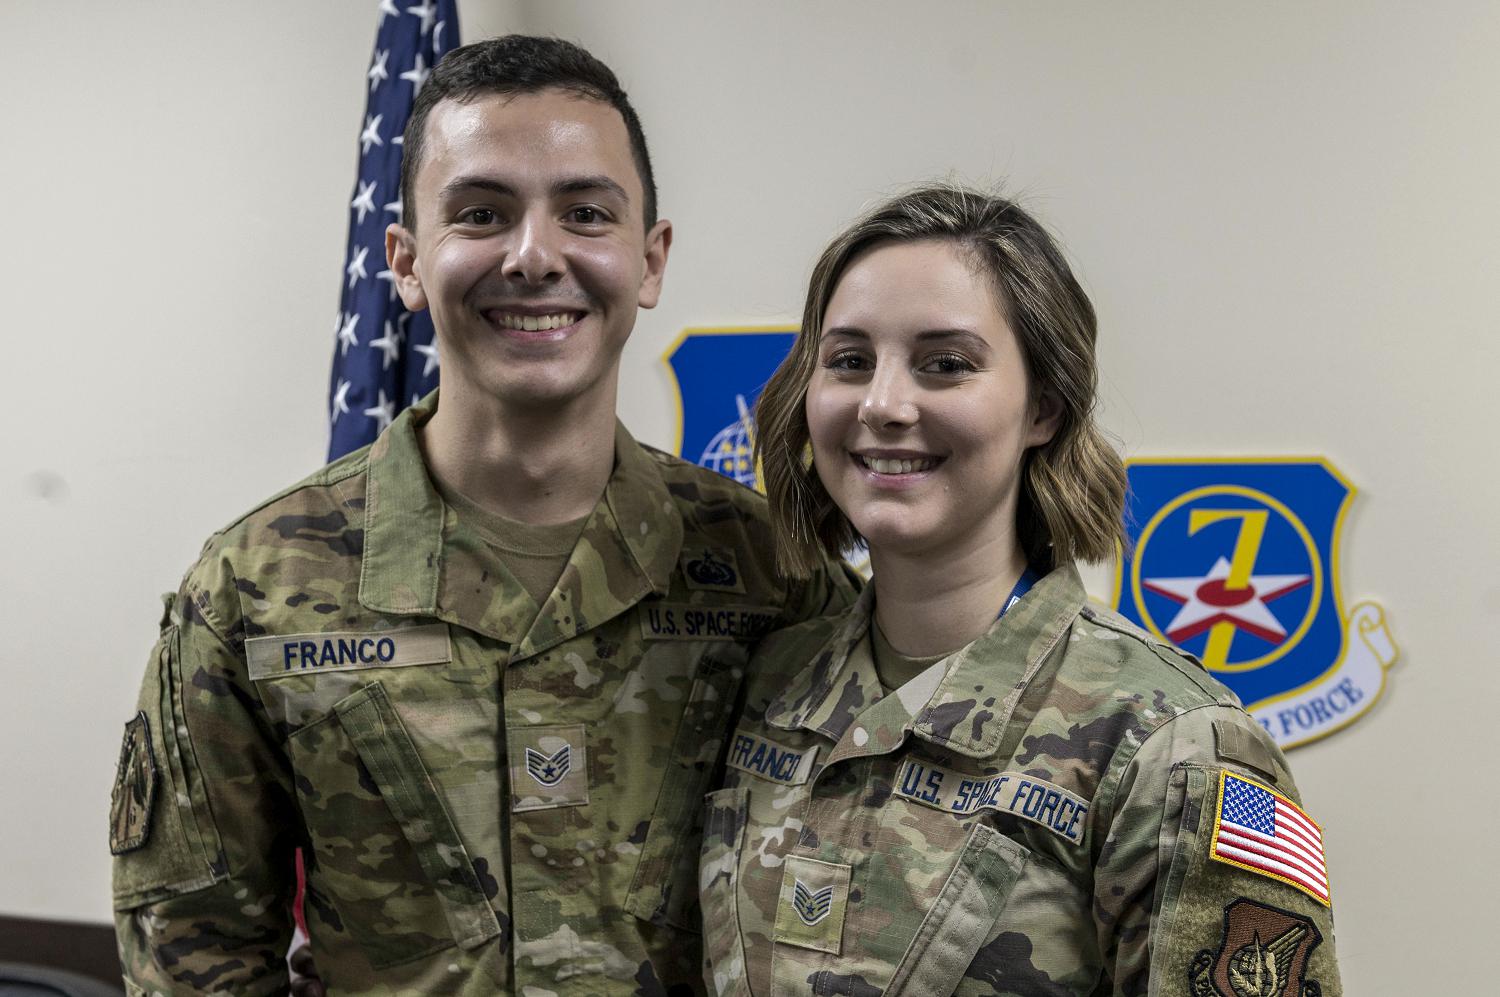 Space Force Sgts. Frank and Jamie Franco pose for a photo following a transfer ceremony at Osan Air Base, South Korea, Feb. 5, 2021. The Francos, who volunteered to switch services, were among the 5,000 initial airmen selected to help set the foundation for the Space Force. (Photo By: Staff Sgt. Betty R. Chevalier)